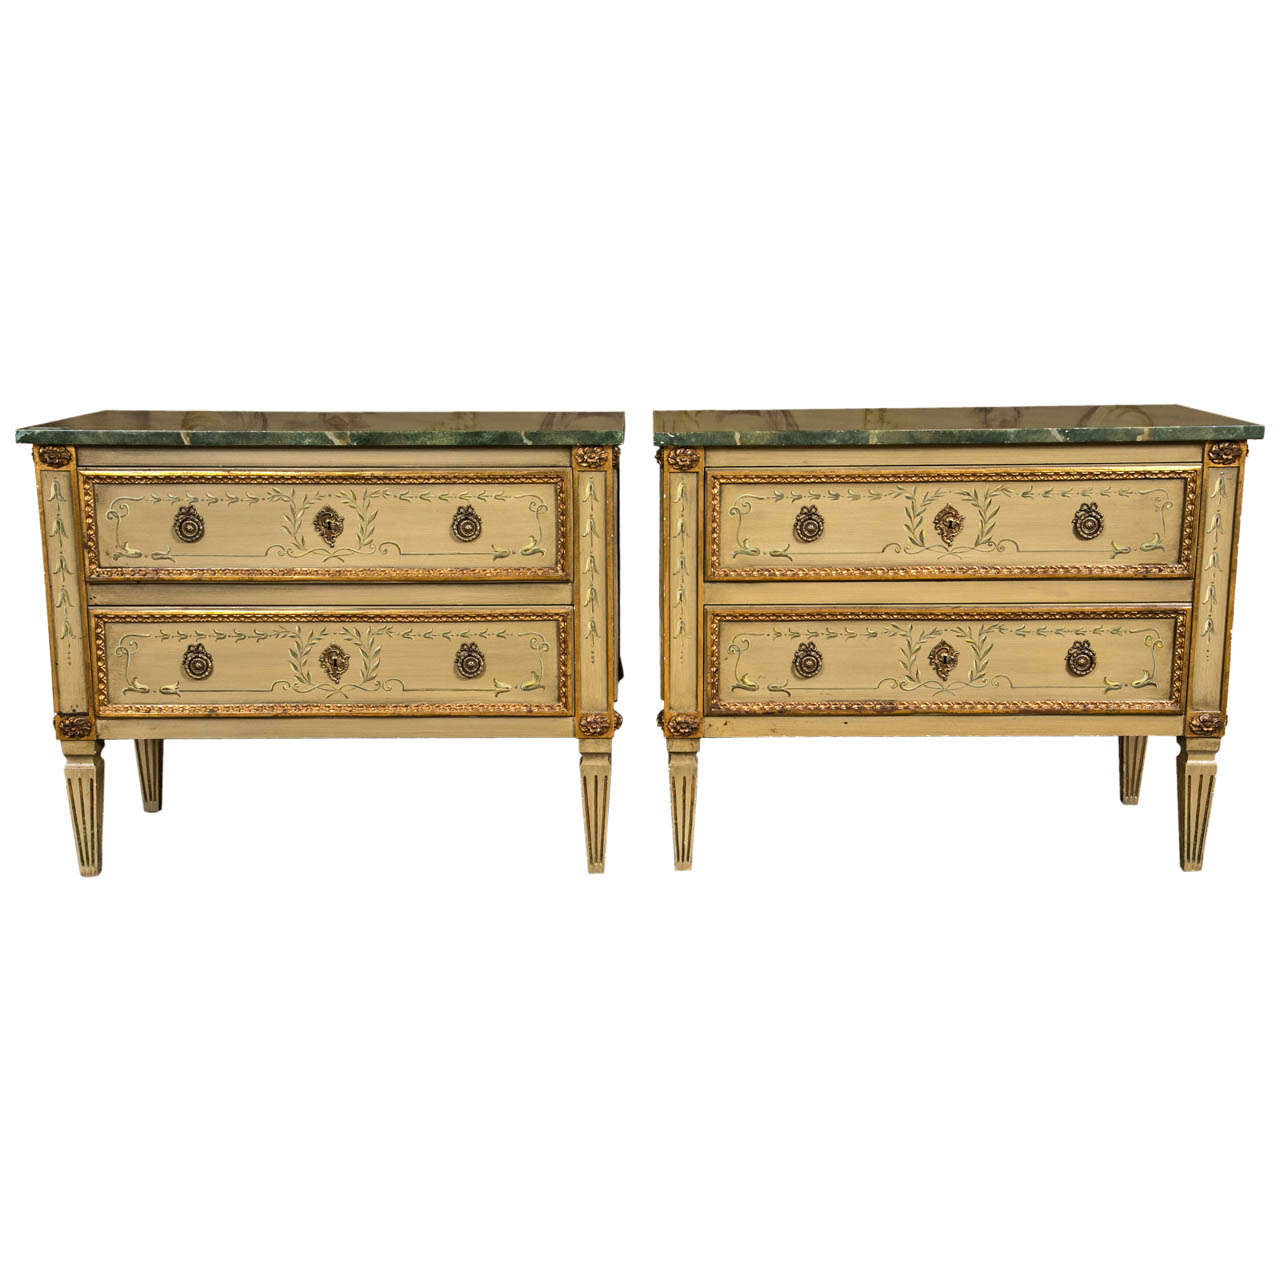 Fine Pair of Julia Gray Painted Italian Chests